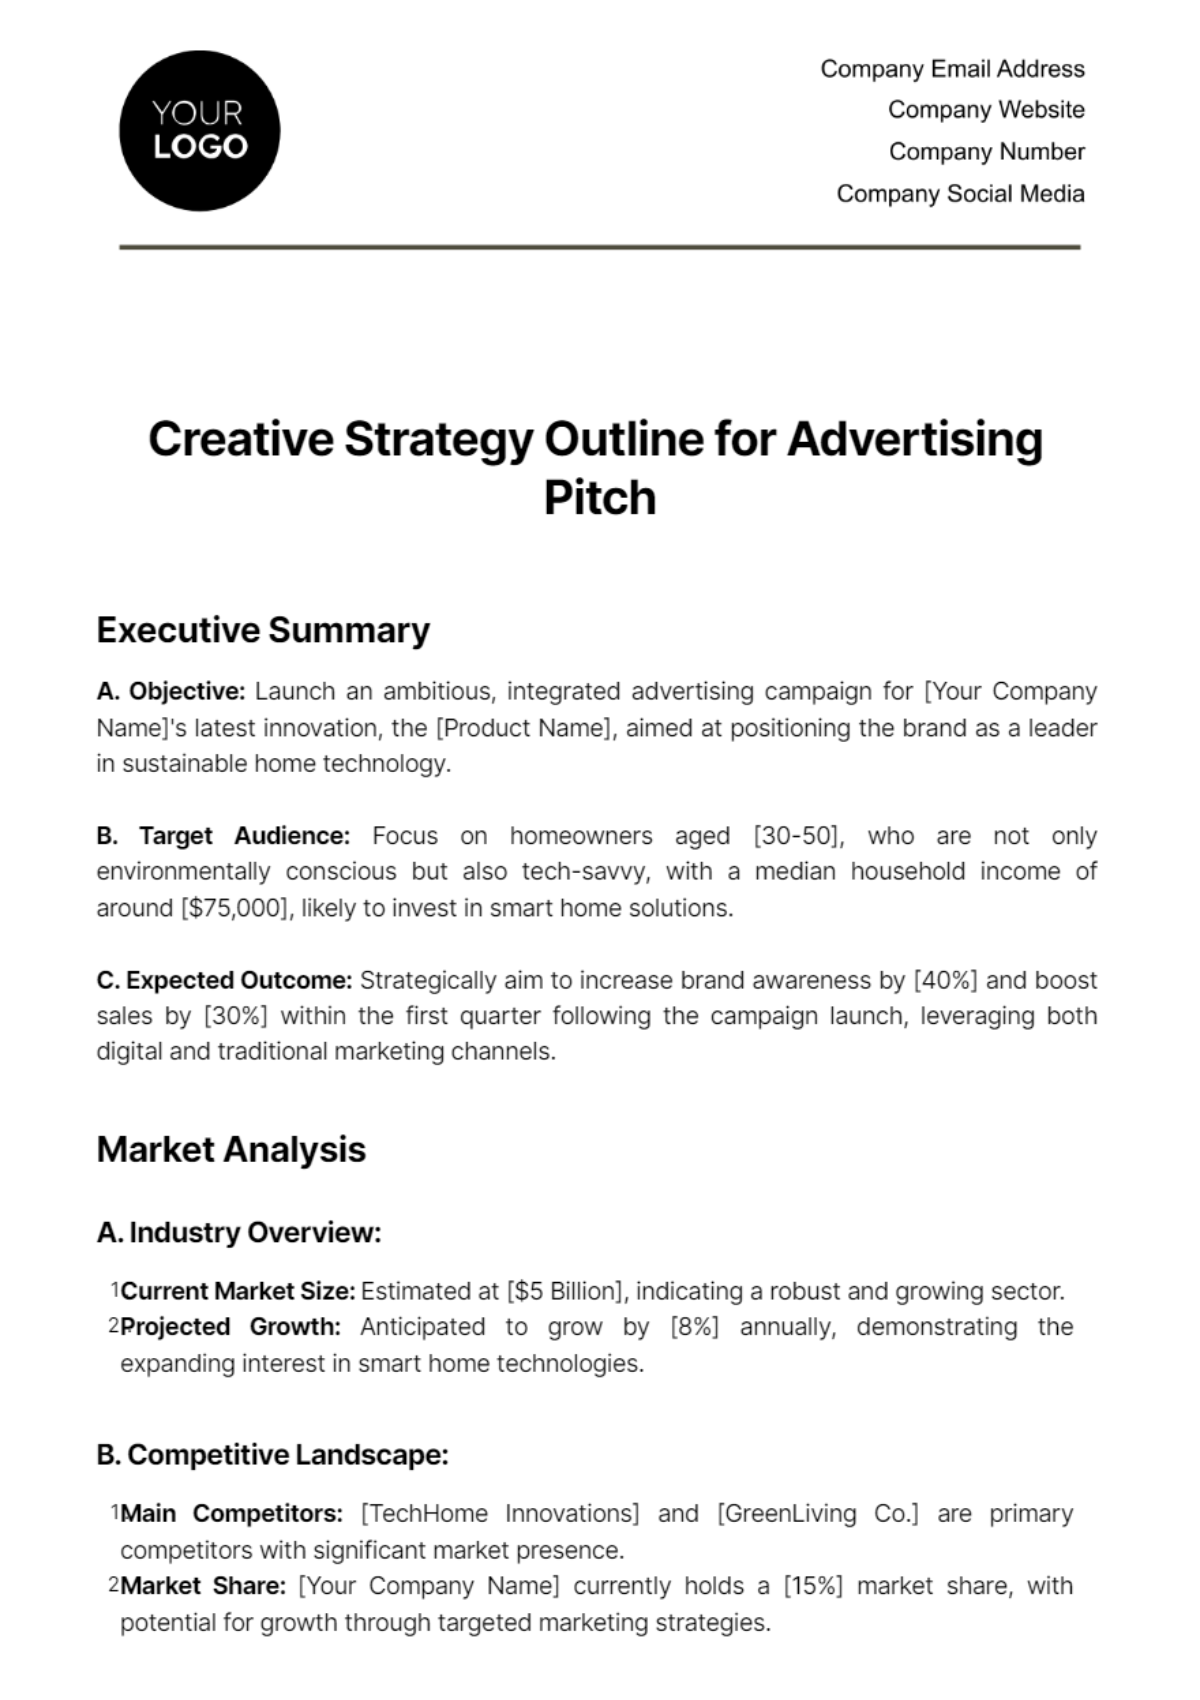 Free Creative Strategy Outline for Advertising Pitch Template